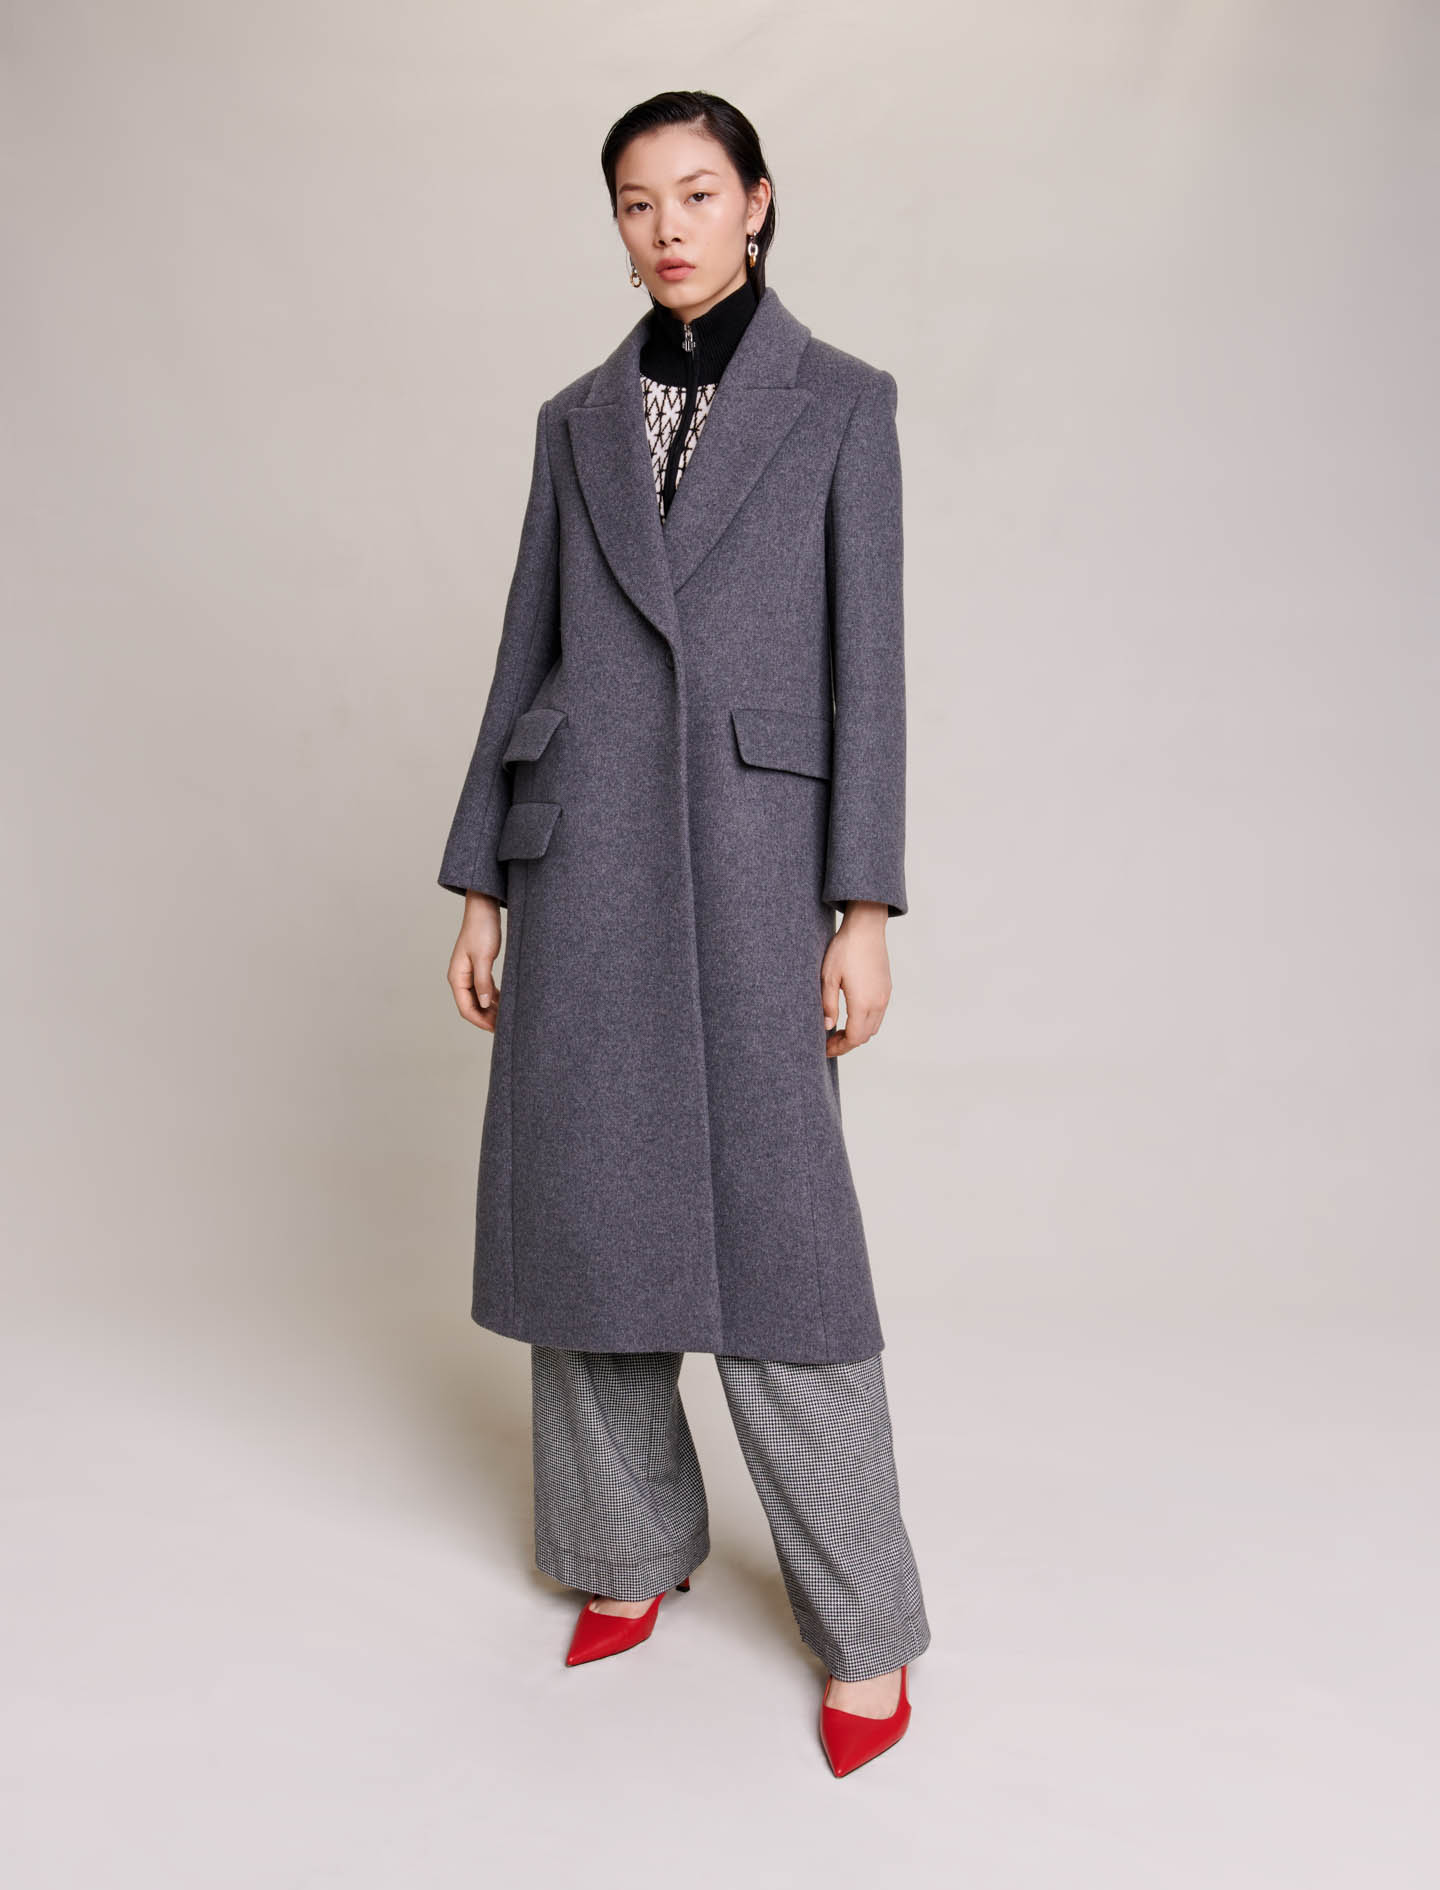 Maje Woman's wool, 123GALAGREY for Fall/Winter, in color Grey / Grey